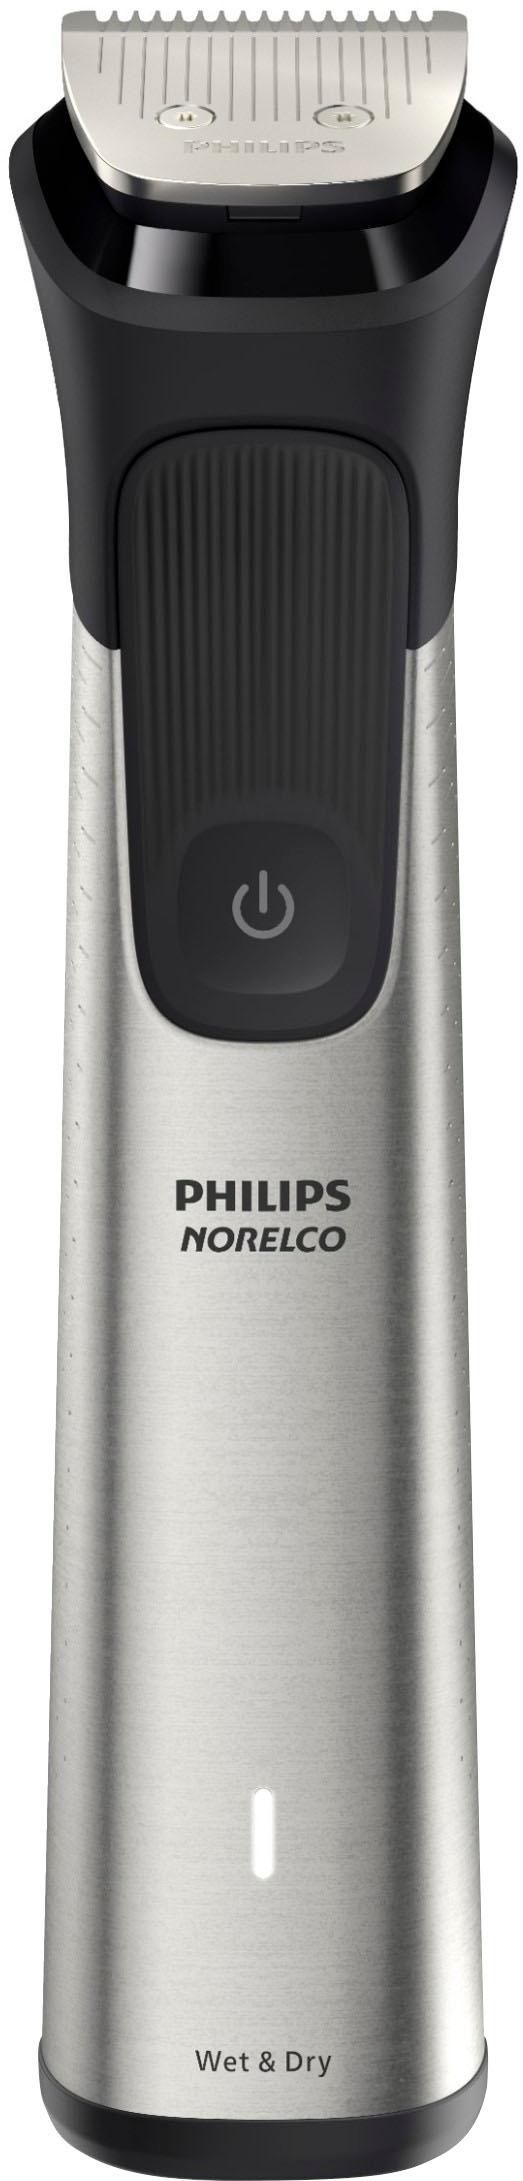 Left View: Philips Norelco - Multigroom Series 7000, Mens Grooming Kit with Trimmer - Silver